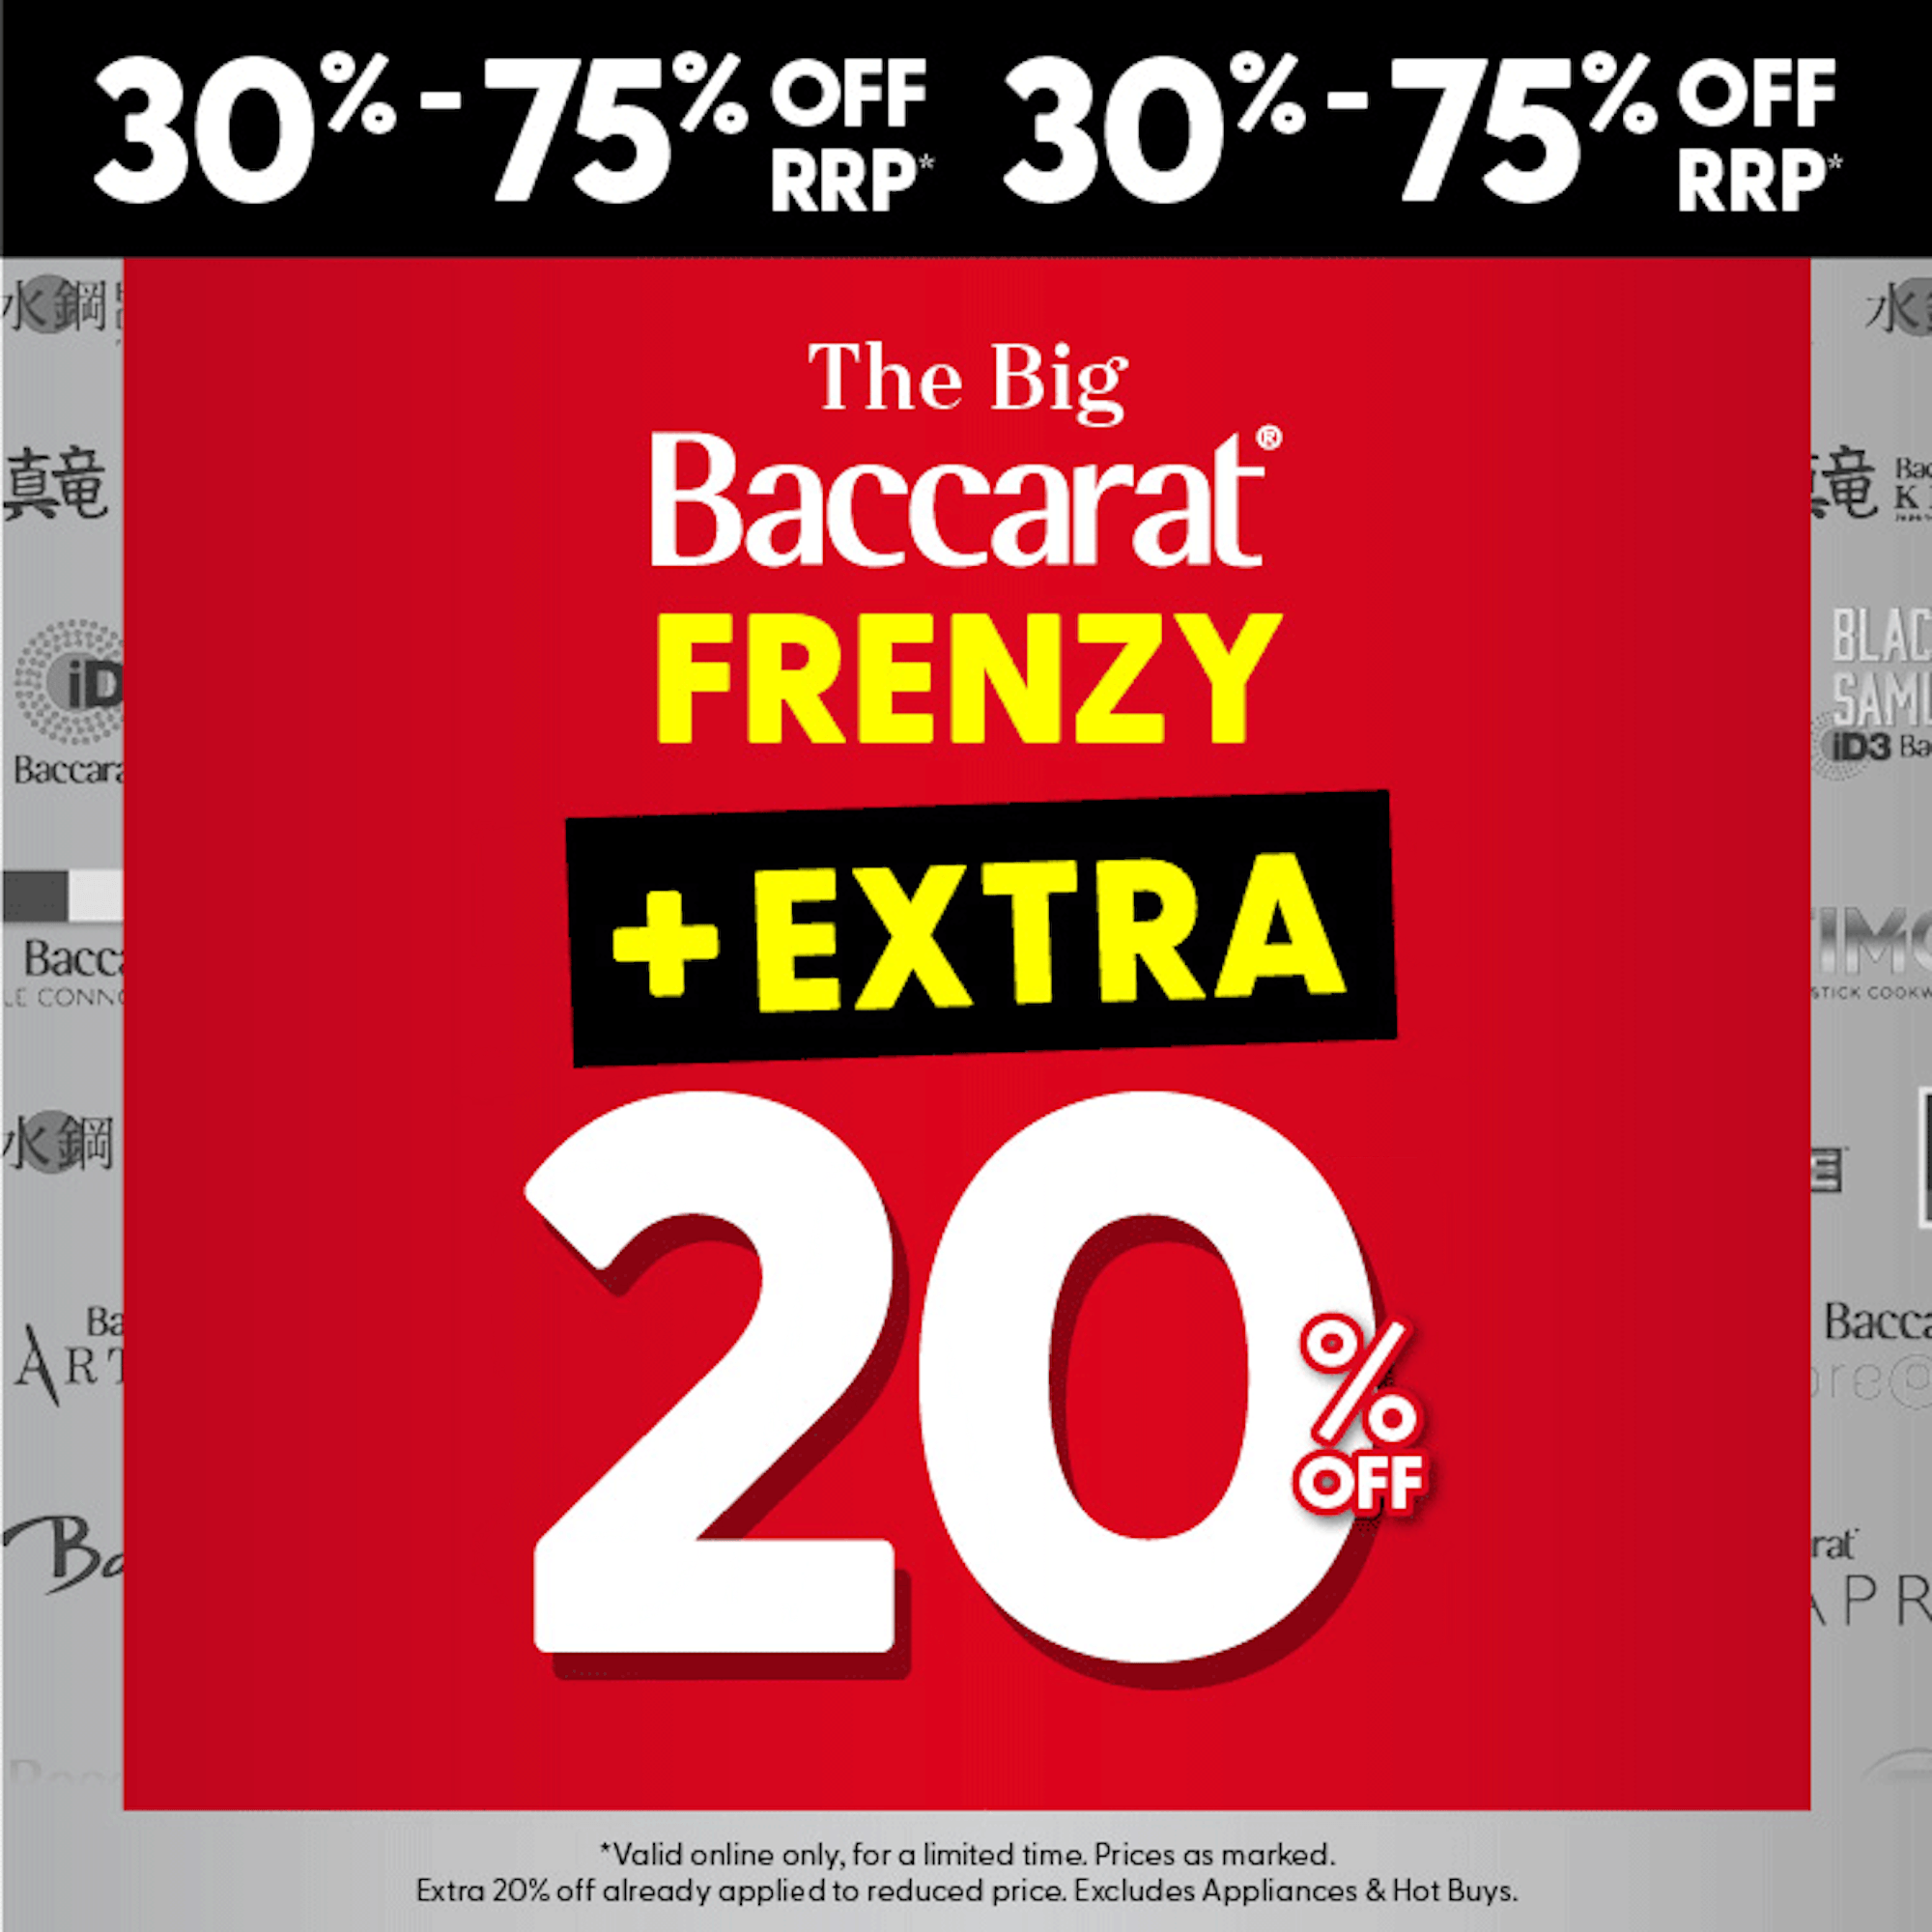 The Big Baccarat Frenzy - 30%-75% off + EXTRA 20% off Sitewide